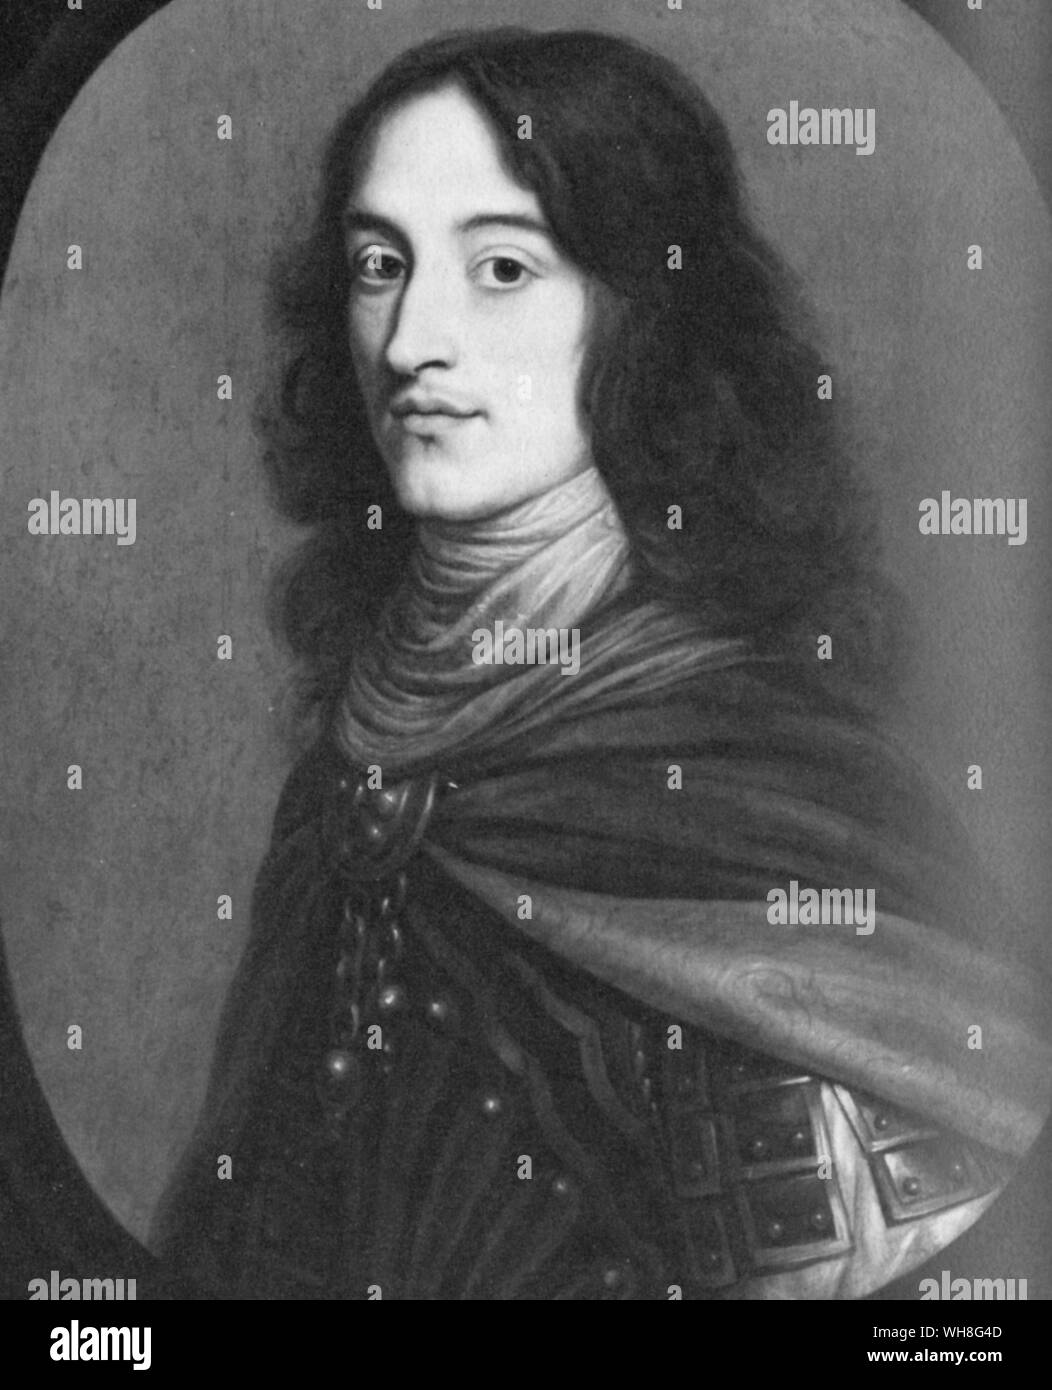 Portrait of Prince Rupert (1619-1682). Royalist commander in the English Civil War. Son of Frederick V, king of Bohemia, and Elizabeth Stuart, daughter of James I and the nephew of King Charles I of England. This War Without An Enemy by Richard Ollard, page 68. Stock Photo